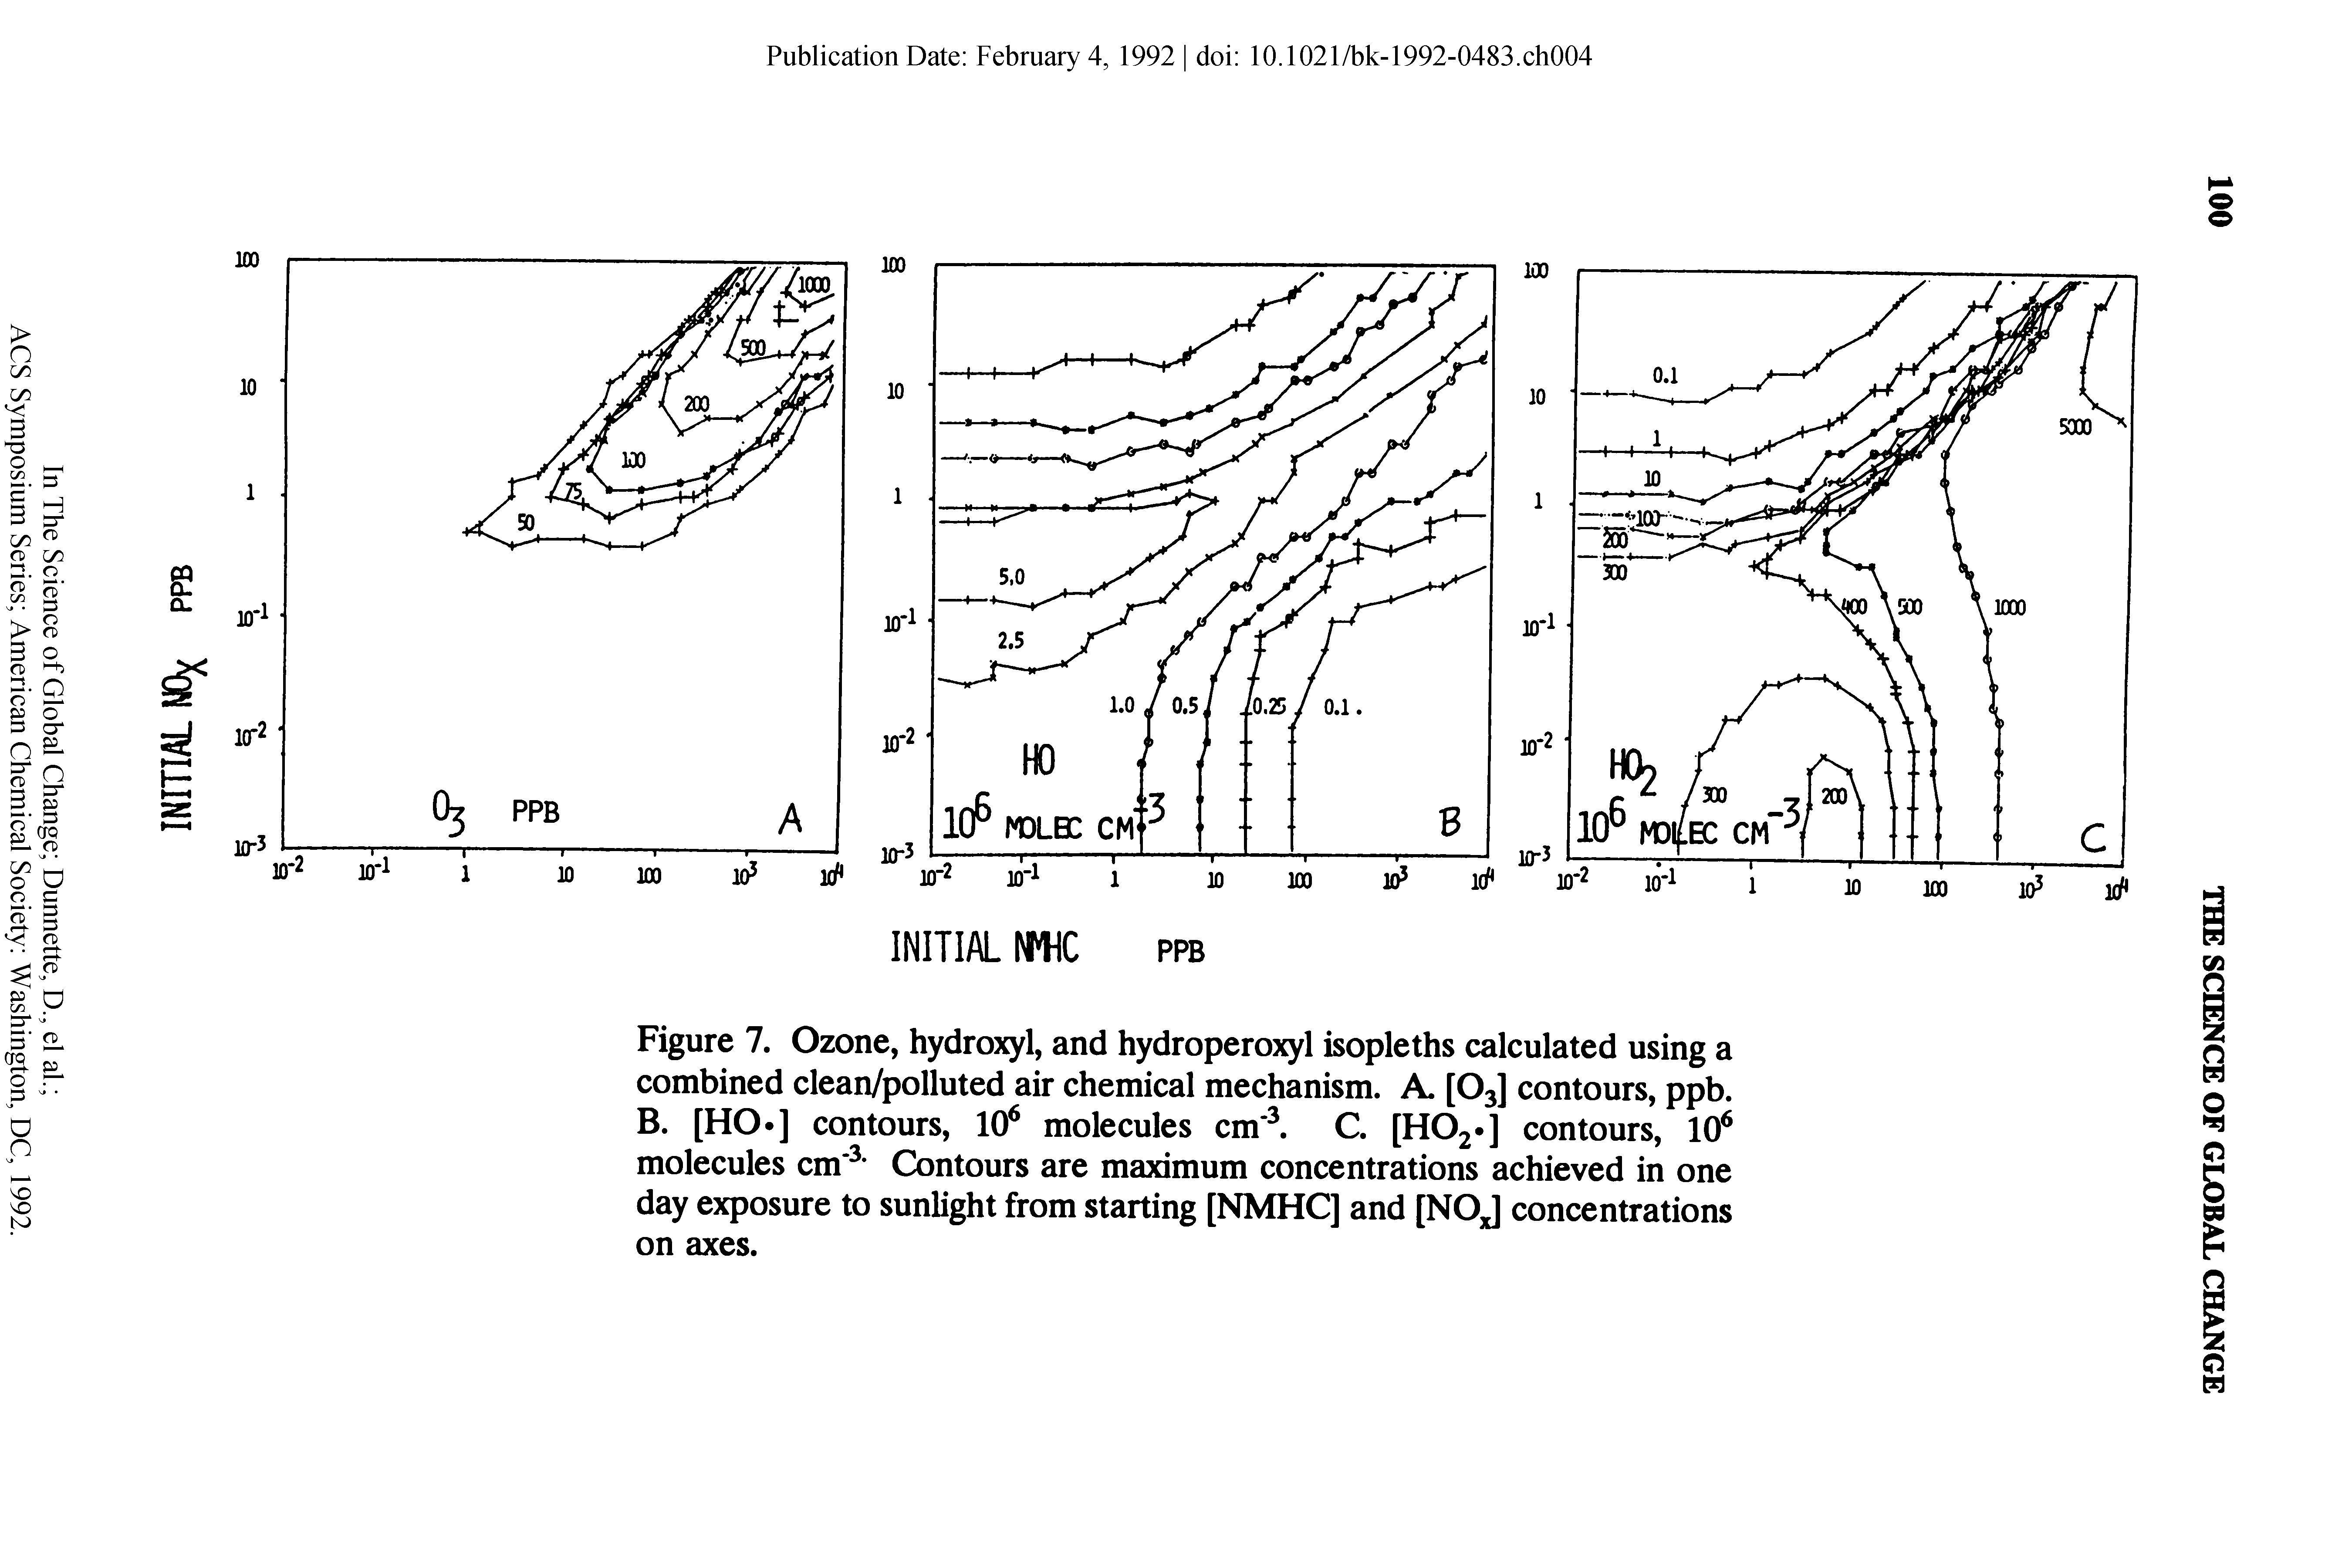 Figure 7. Ozone, hydroxyl, and hydroperoxyl isopleths calculated using a combined clean/polluted air chemical mechanism. A. [O3] contours, ppb. B. [HO.] contours, 10 molecules cm . C. [H02 ] contours, 10 molecules cm Contours are maximum concentrations achieved in one day exposure to sunlight from starting [NMHC] and [NOJ concentrations on axes.